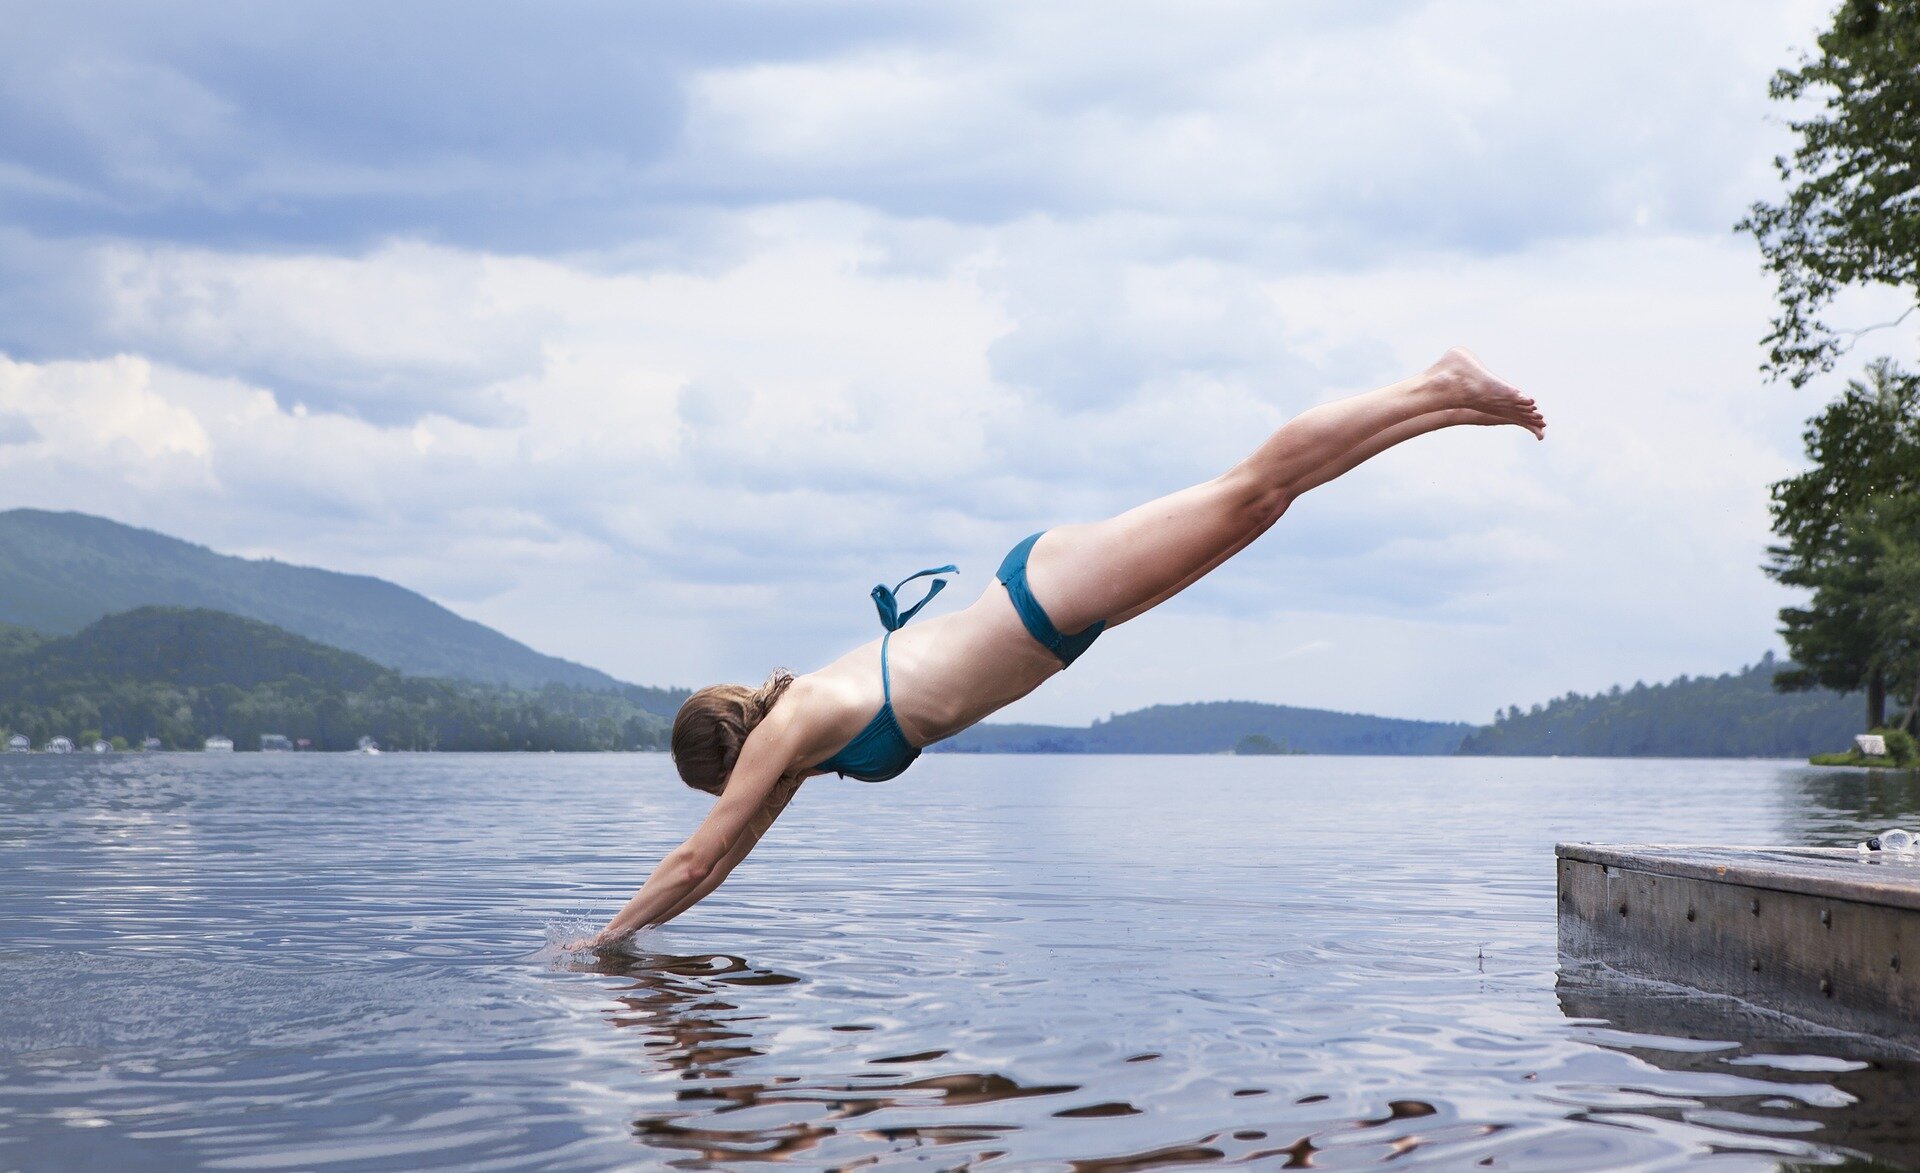 #A little-known hazard linked to open water swimming